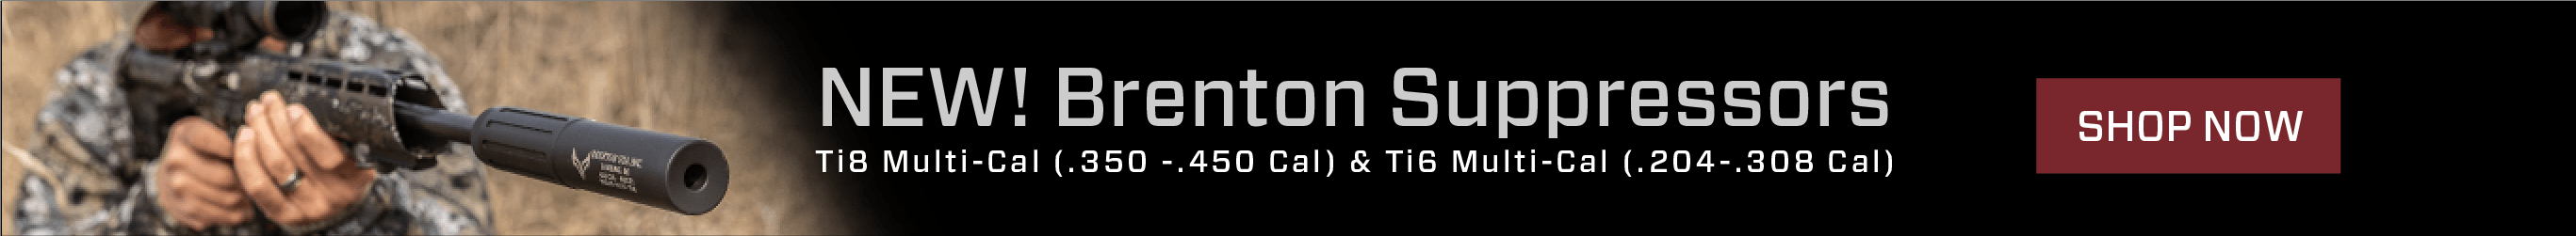 Brenton Suppressors Now Available